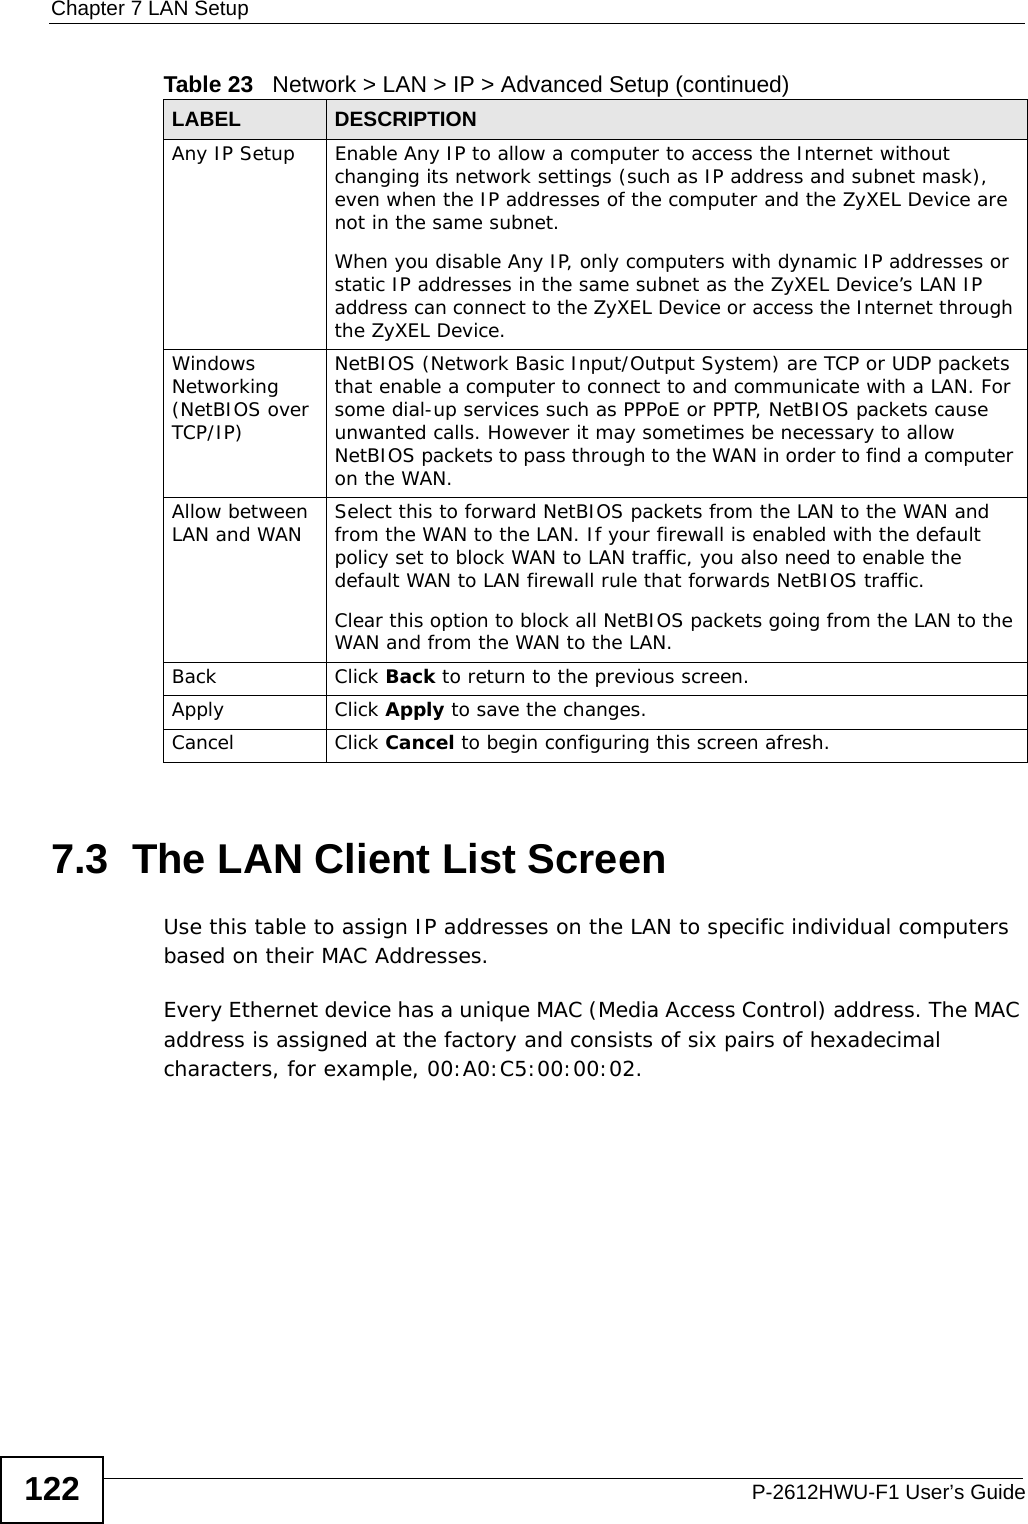 Chapter 7 LAN SetupP-2612HWU-F1 User’s Guide1227.3  The LAN Client List ScreenUse this table to assign IP addresses on the LAN to specific individual computers based on their MAC Addresses. Every Ethernet device has a unique MAC (Media Access Control) address. The MAC address is assigned at the factory and consists of six pairs of hexadecimal characters, for example, 00:A0:C5:00:00:02.Any IP Setup Enable Any IP to allow a computer to access the Internet without changing its network settings (such as IP address and subnet mask), even when the IP addresses of the computer and the ZyXEL Device are not in the same subnet. When you disable Any IP, only computers with dynamic IP addresses or static IP addresses in the same subnet as the ZyXEL Device’s LAN IP address can connect to the ZyXEL Device or access the Internet through the ZyXEL Device.Windows Networking (NetBIOS over TCP/IP)NetBIOS (Network Basic Input/Output System) are TCP or UDP packets that enable a computer to connect to and communicate with a LAN. For some dial-up services such as PPPoE or PPTP, NetBIOS packets cause unwanted calls. However it may sometimes be necessary to allow NetBIOS packets to pass through to the WAN in order to find a computer on the WAN.Allow between LAN and WAN Select this to forward NetBIOS packets from the LAN to the WAN and from the WAN to the LAN. If your firewall is enabled with the default policy set to block WAN to LAN traffic, you also need to enable the default WAN to LAN firewall rule that forwards NetBIOS traffic.Clear this option to block all NetBIOS packets going from the LAN to the WAN and from the WAN to the LAN.Back Click Back to return to the previous screen.Apply Click Apply to save the changes. Cancel Click Cancel to begin configuring this screen afresh.Table 23   Network &gt; LAN &gt; IP &gt; Advanced Setup (continued)LABEL DESCRIPTION